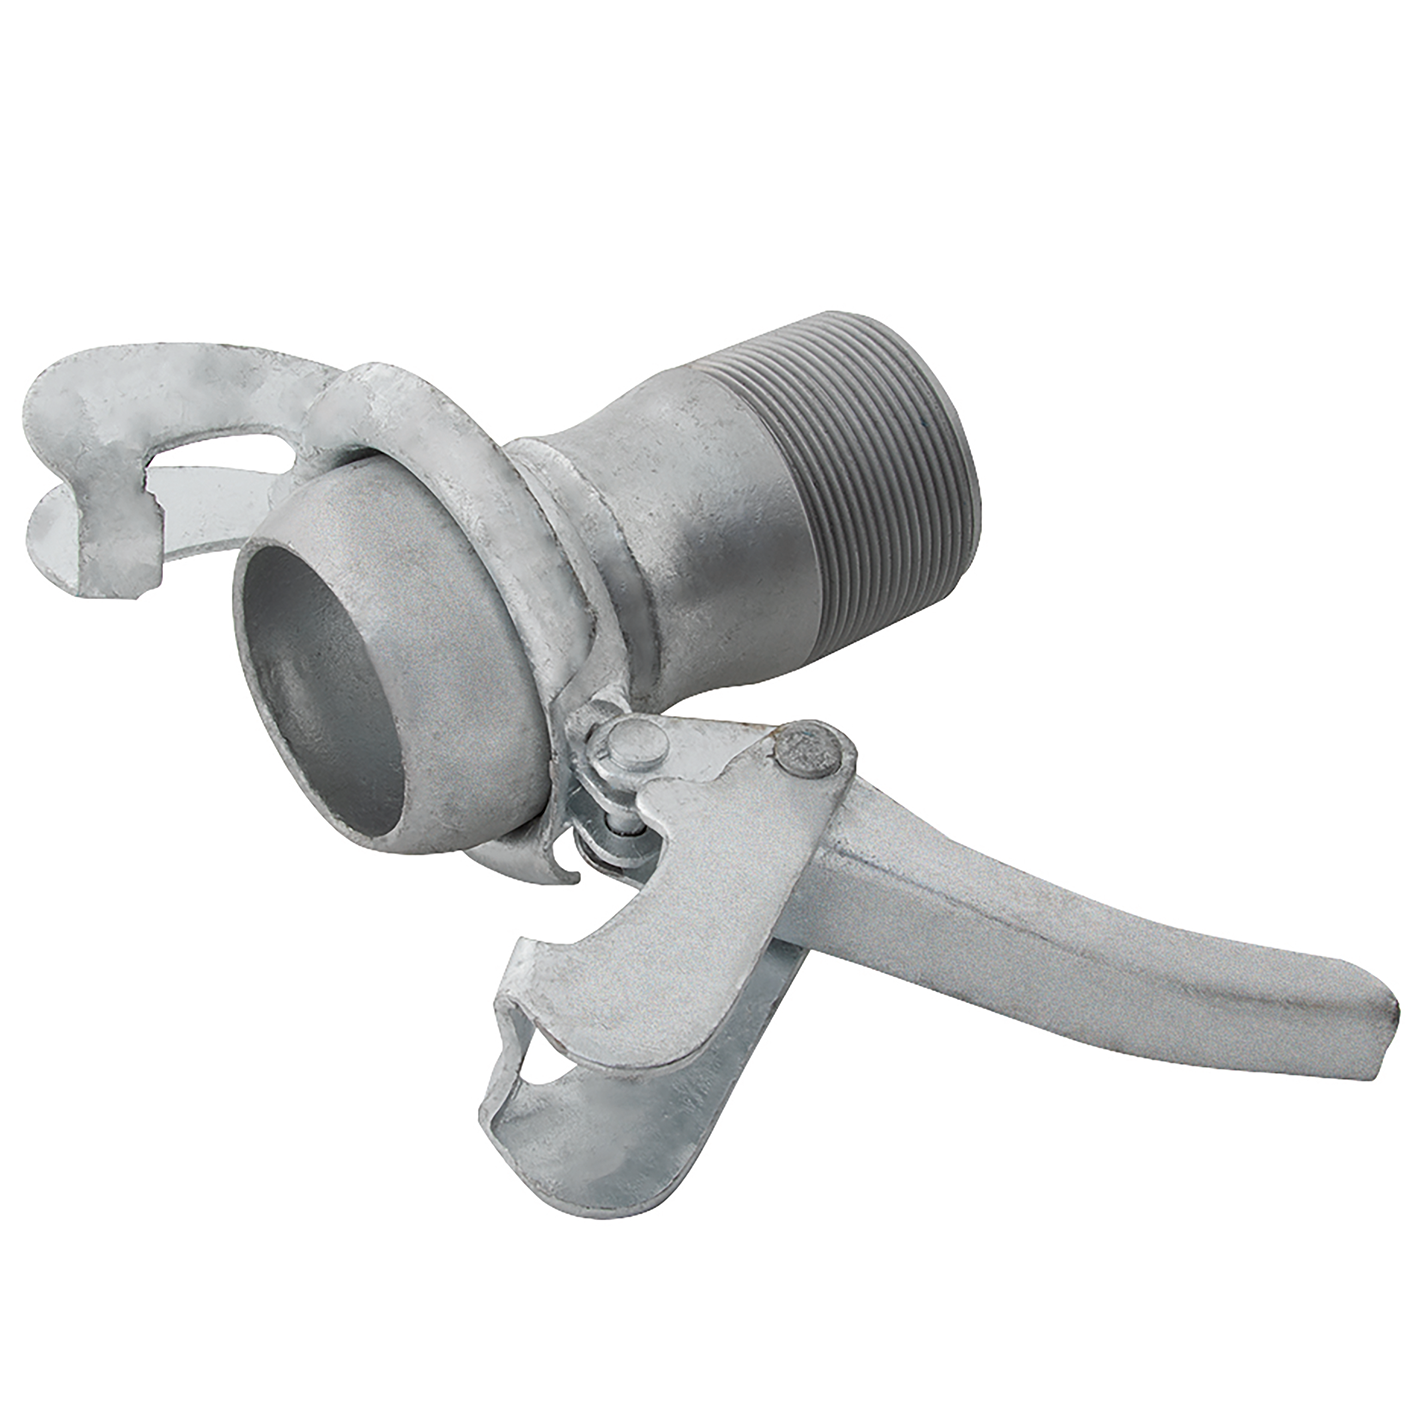 2" BSPP Male Lever Lock Coupling